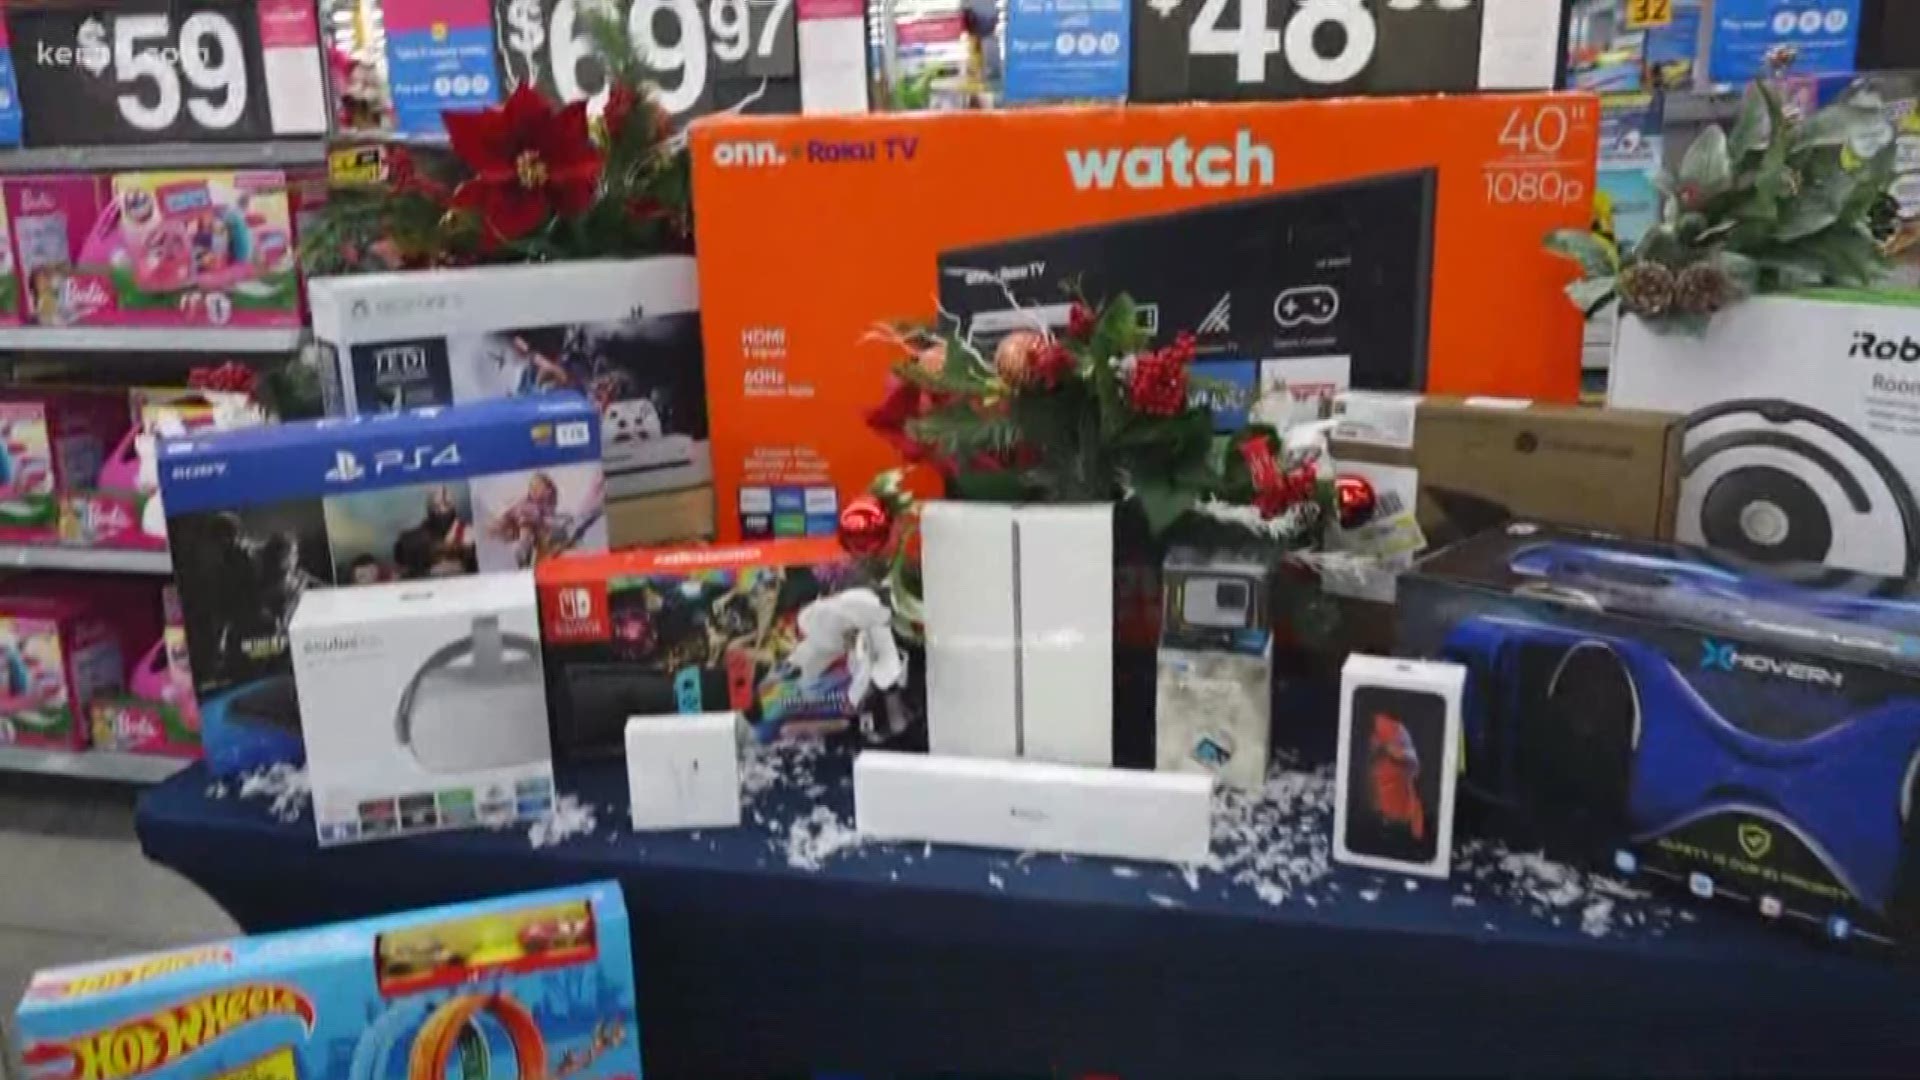 Televisions, games, Barbies, power tools; Black Friday bargains are coming!